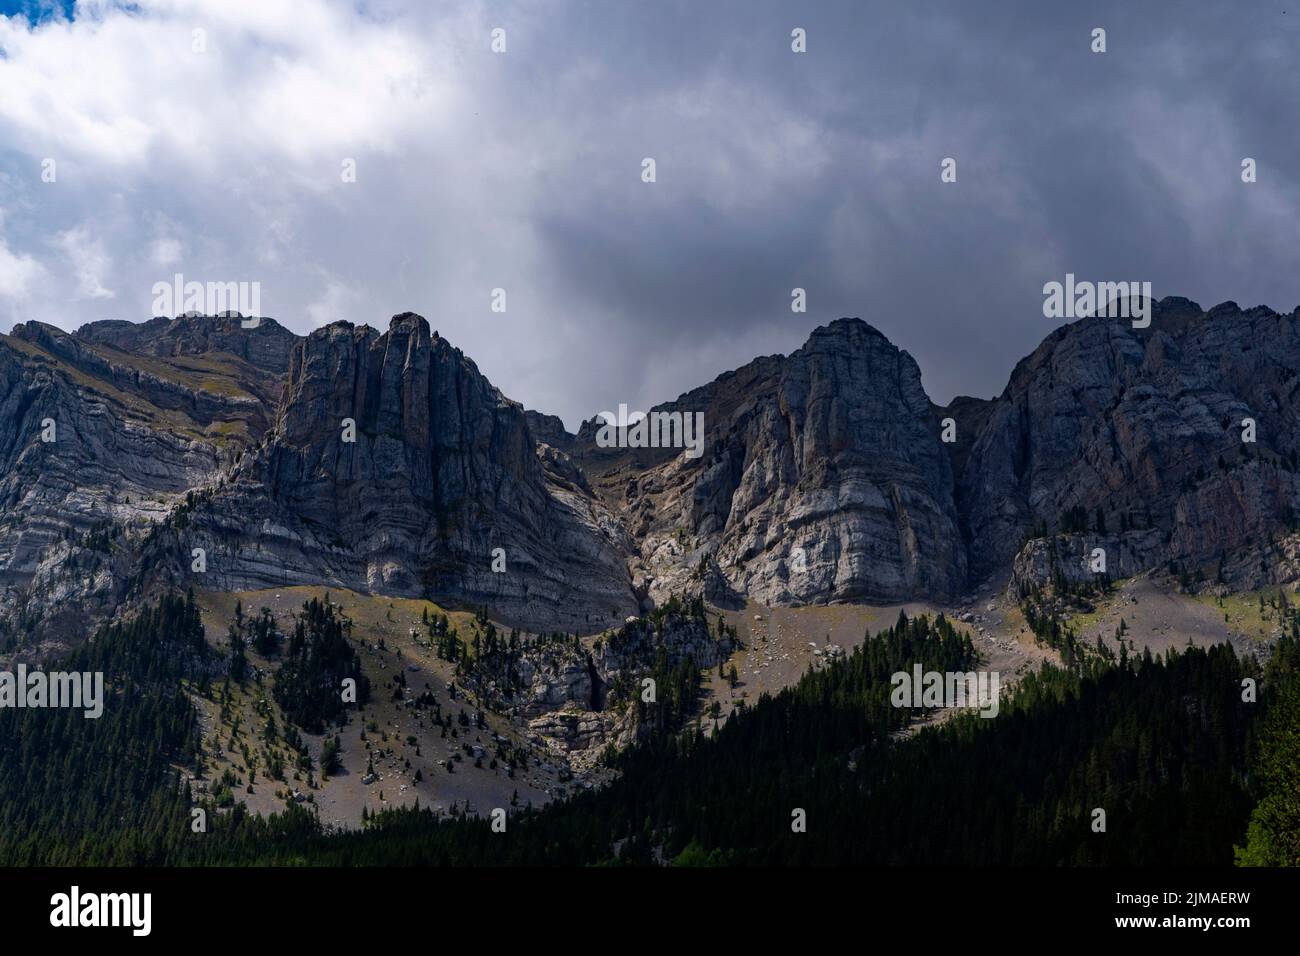 Serra del Cadí mountain range, Catalonia, Spain, with 500 high cliffs, reaching altitudes of over 2000m. The mountains lie within the Parc Natural del Stock Photo